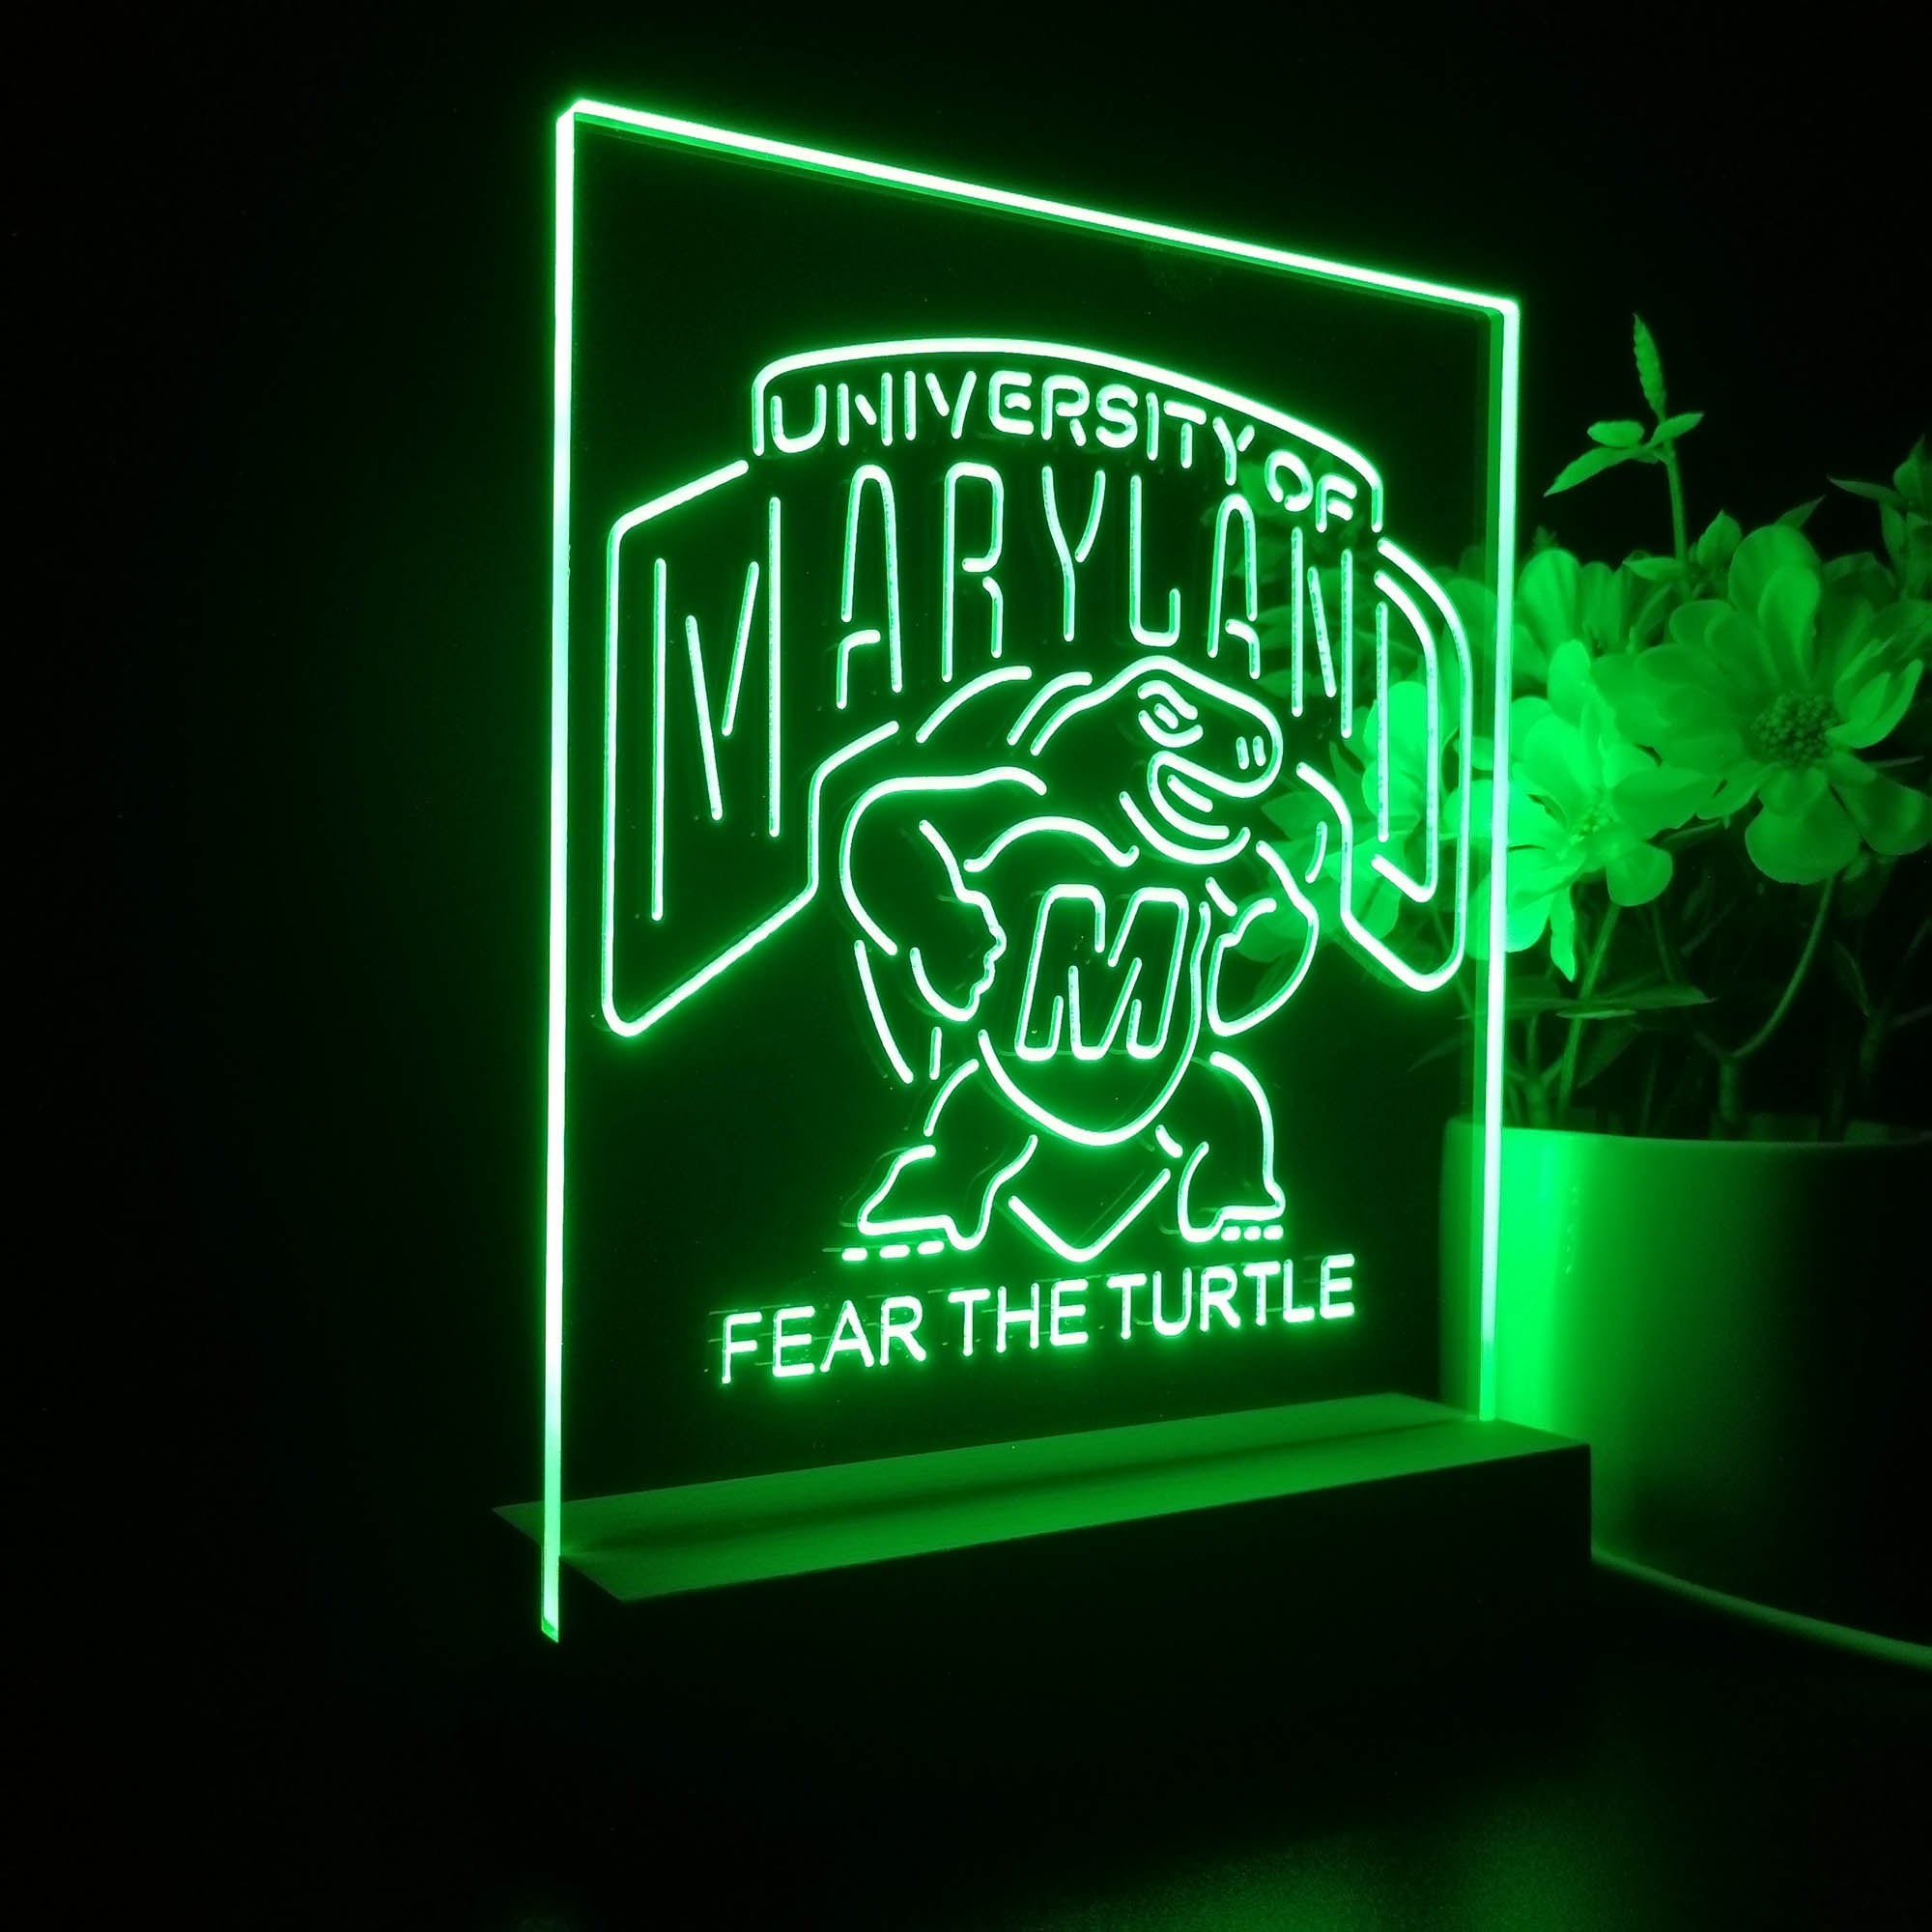 Maryland Turtle Fear The Turtle Night Light LED Sign